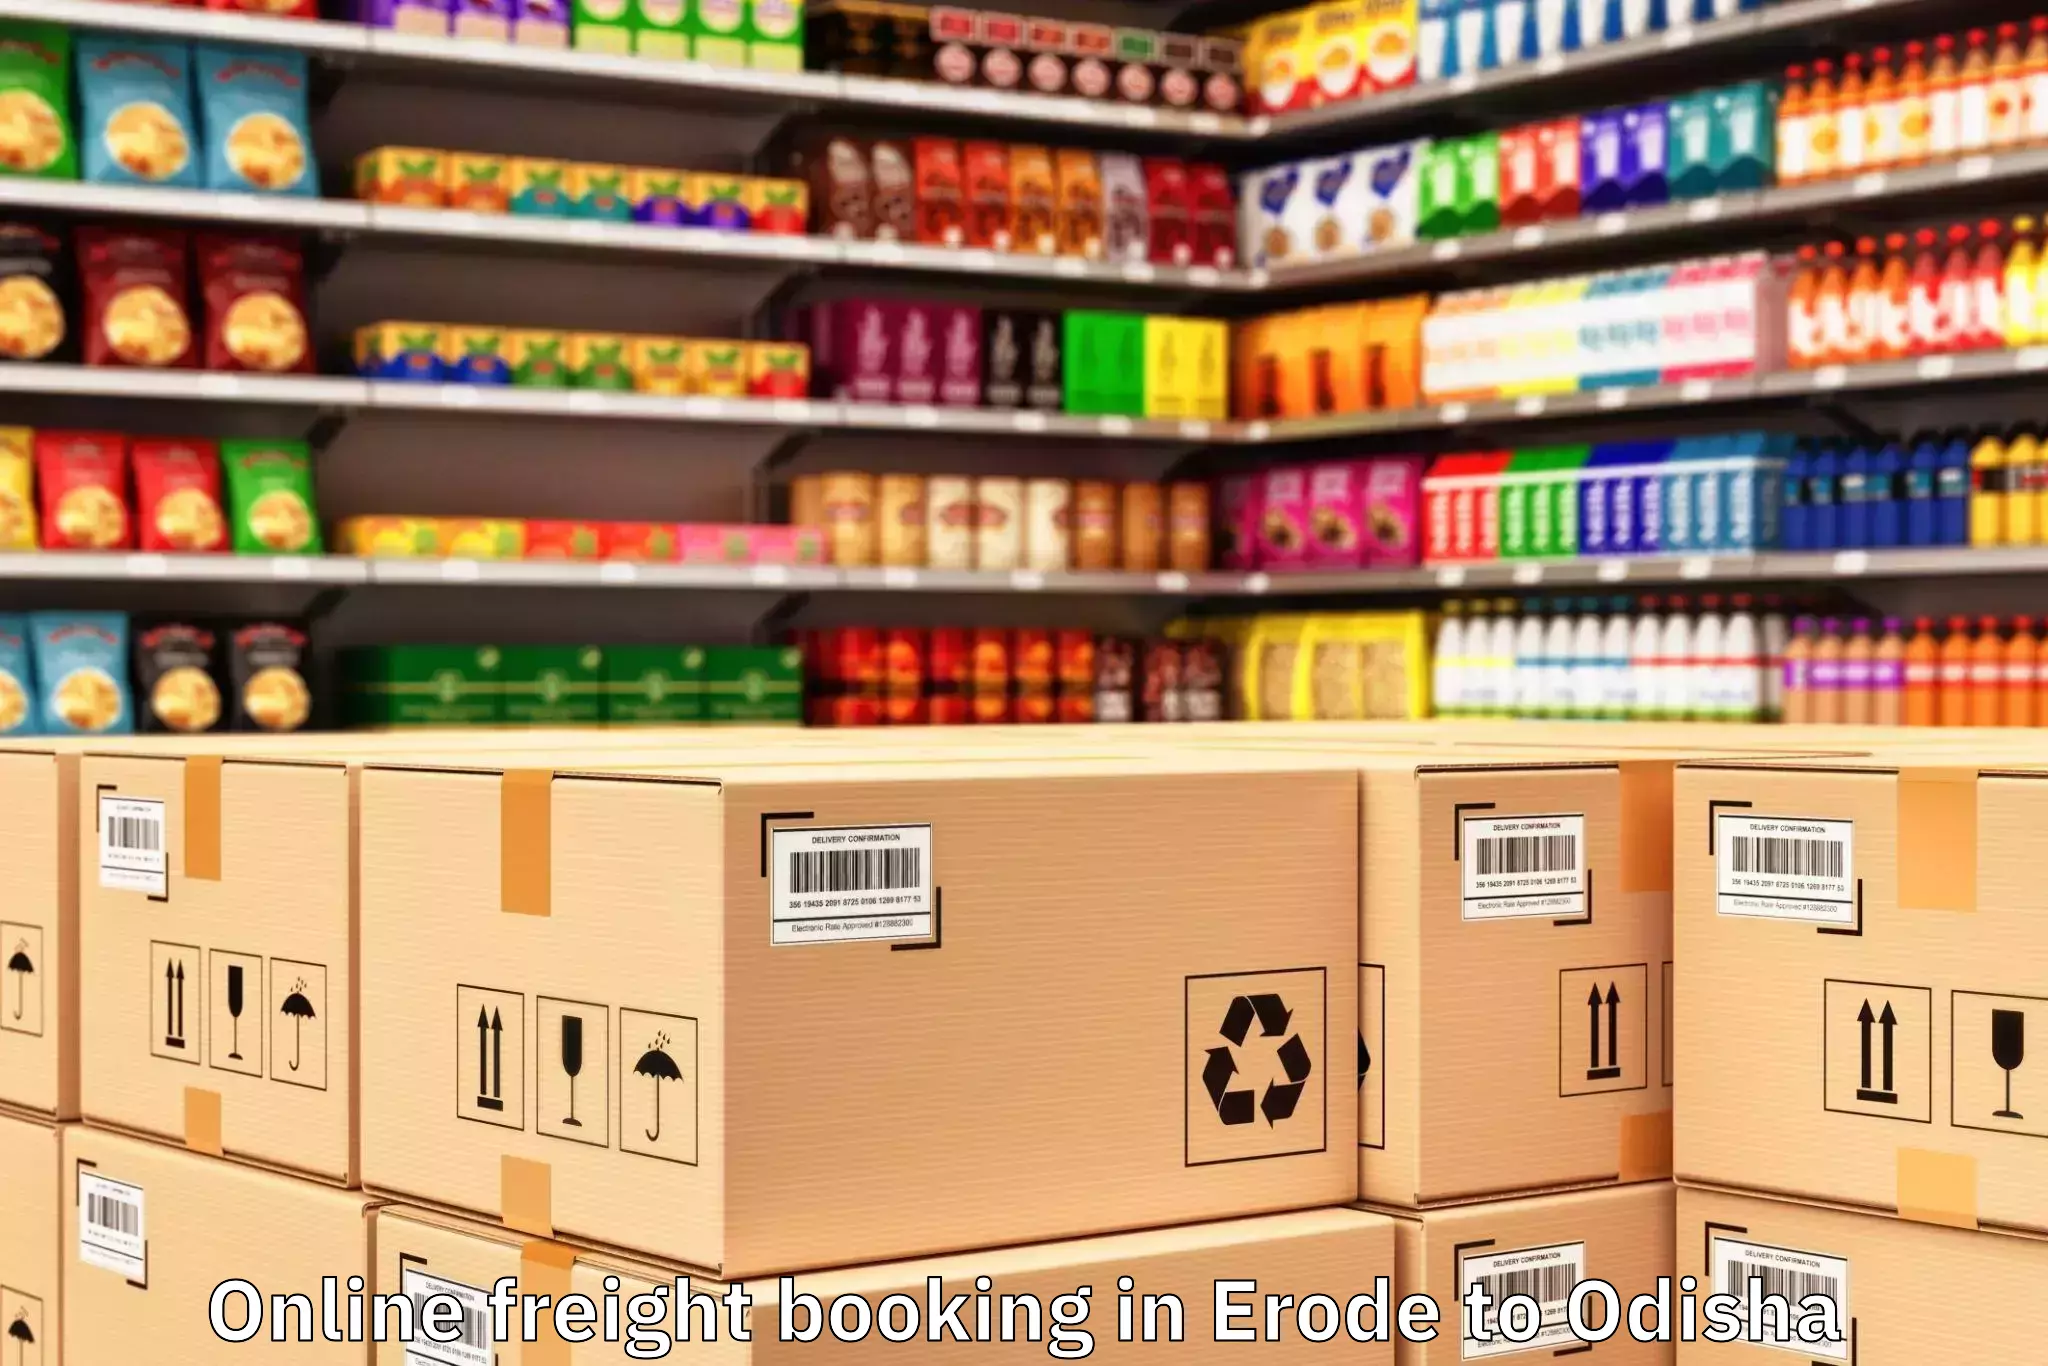 Discover Erode to Nilagiri Online Freight Booking